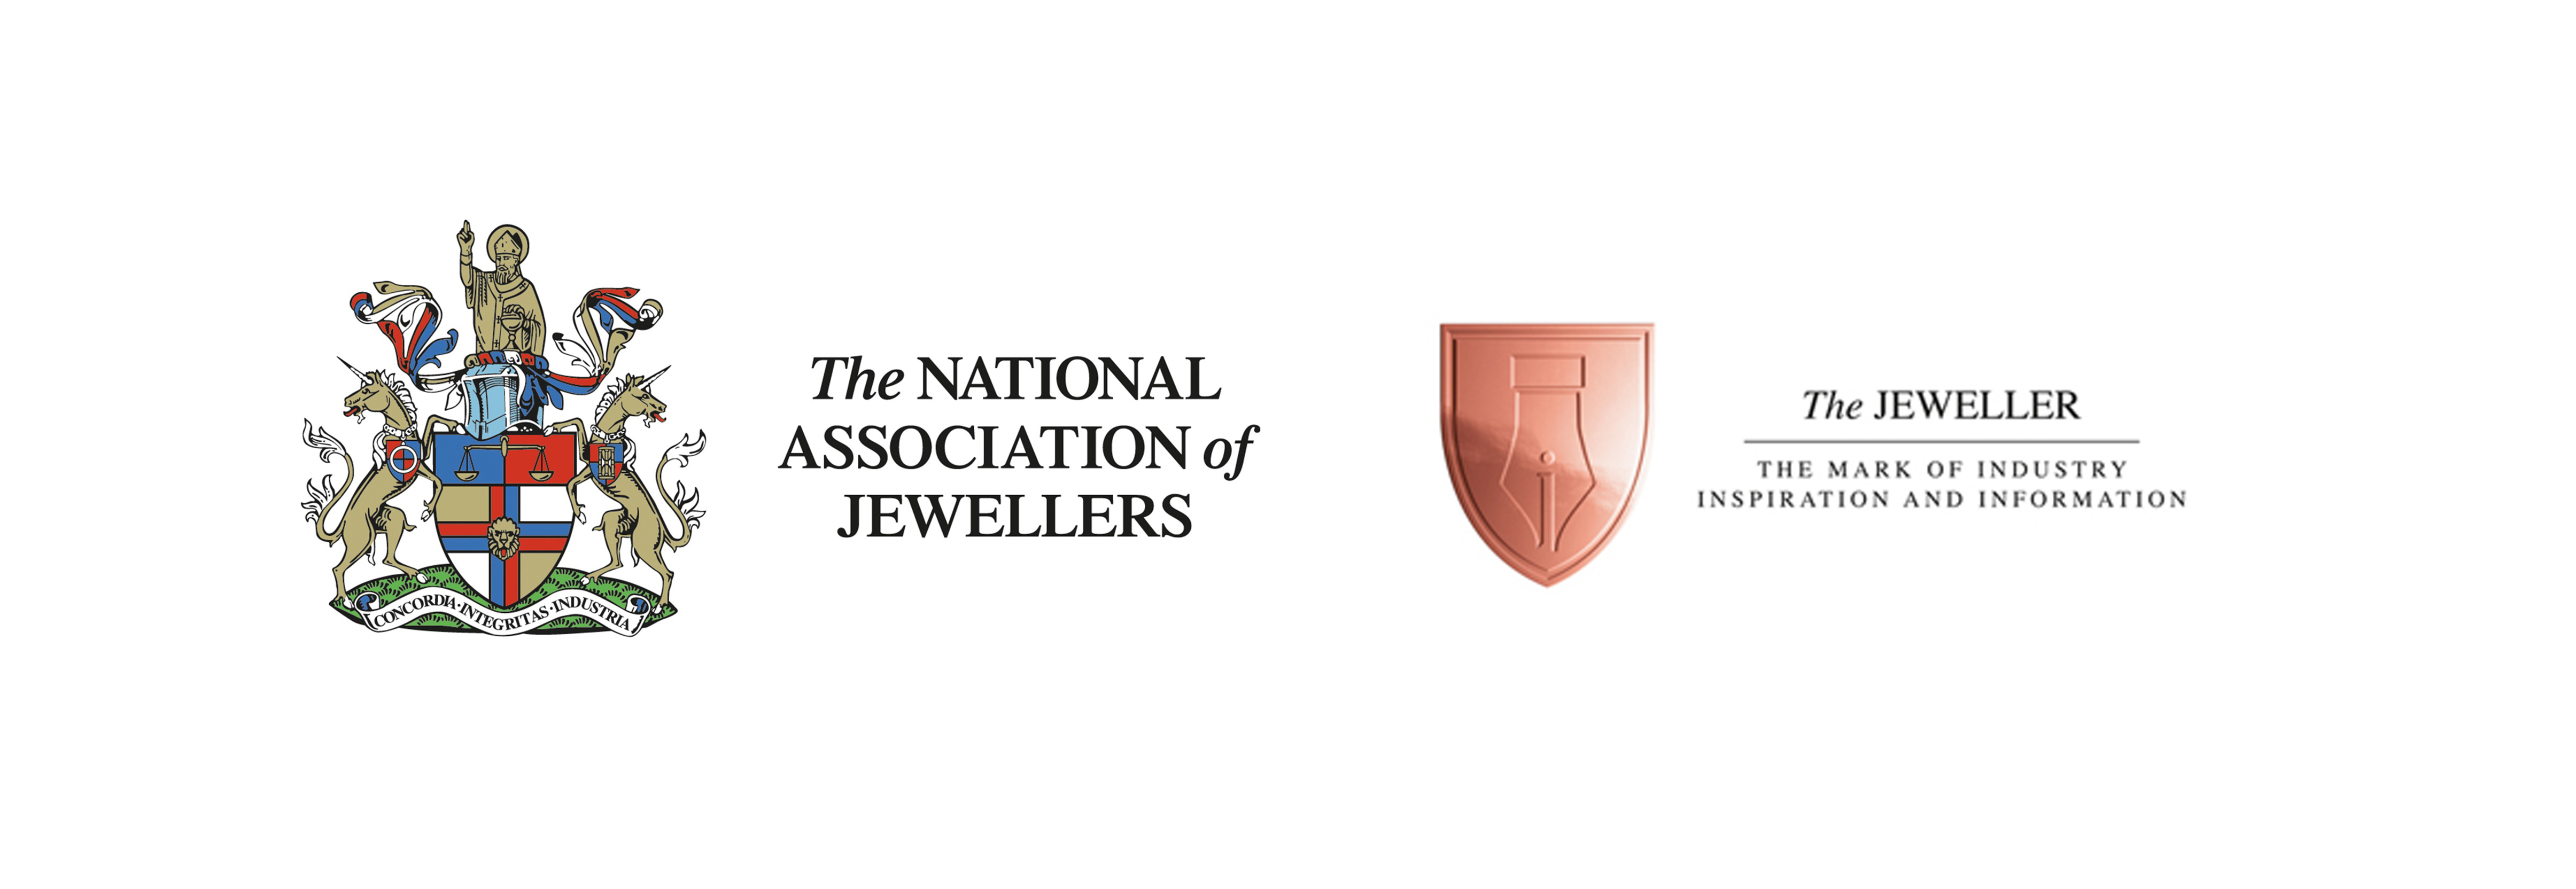 Raw Pearls talks to The Jeweller Magazine about the future of pearls